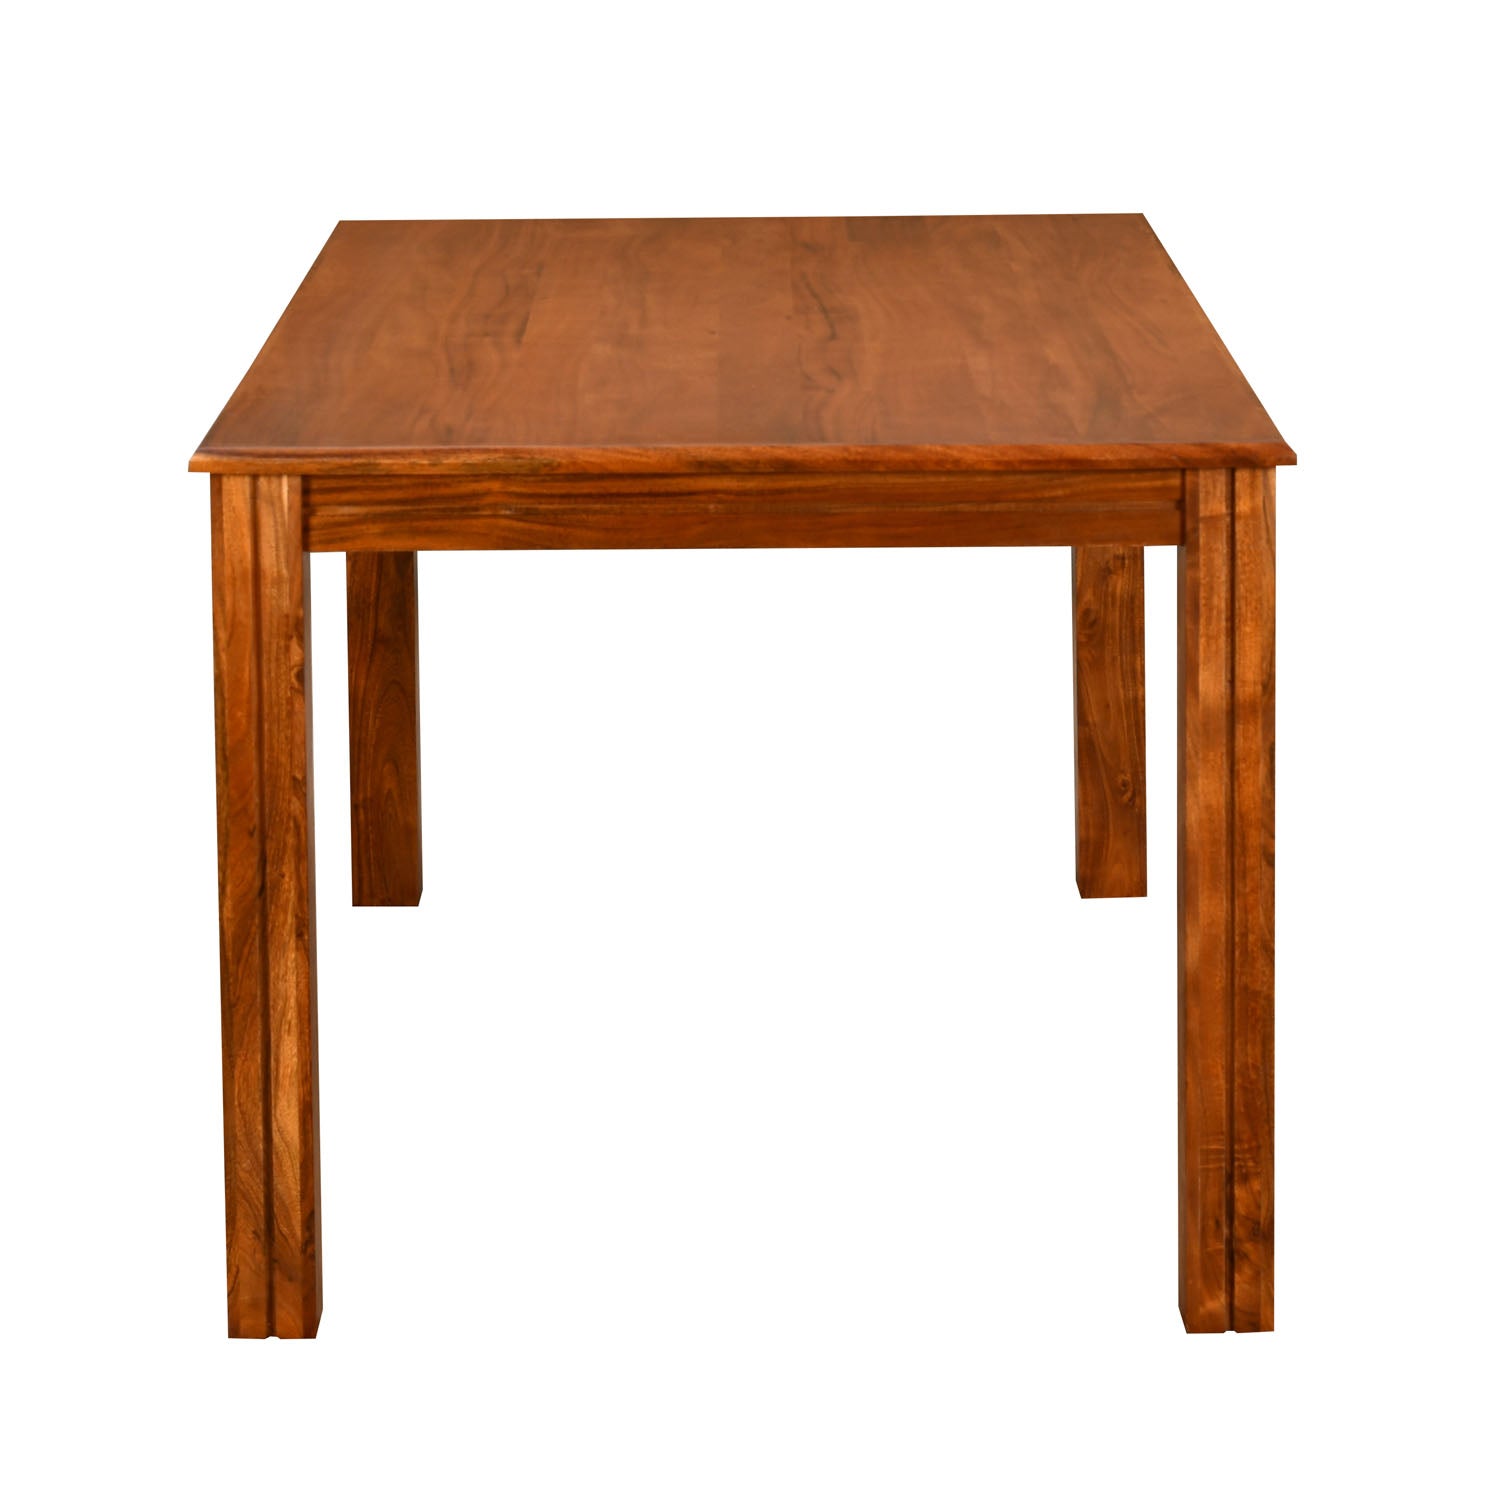 Vera 6 Searer Solid Wood Dining Table (Honey Brown)